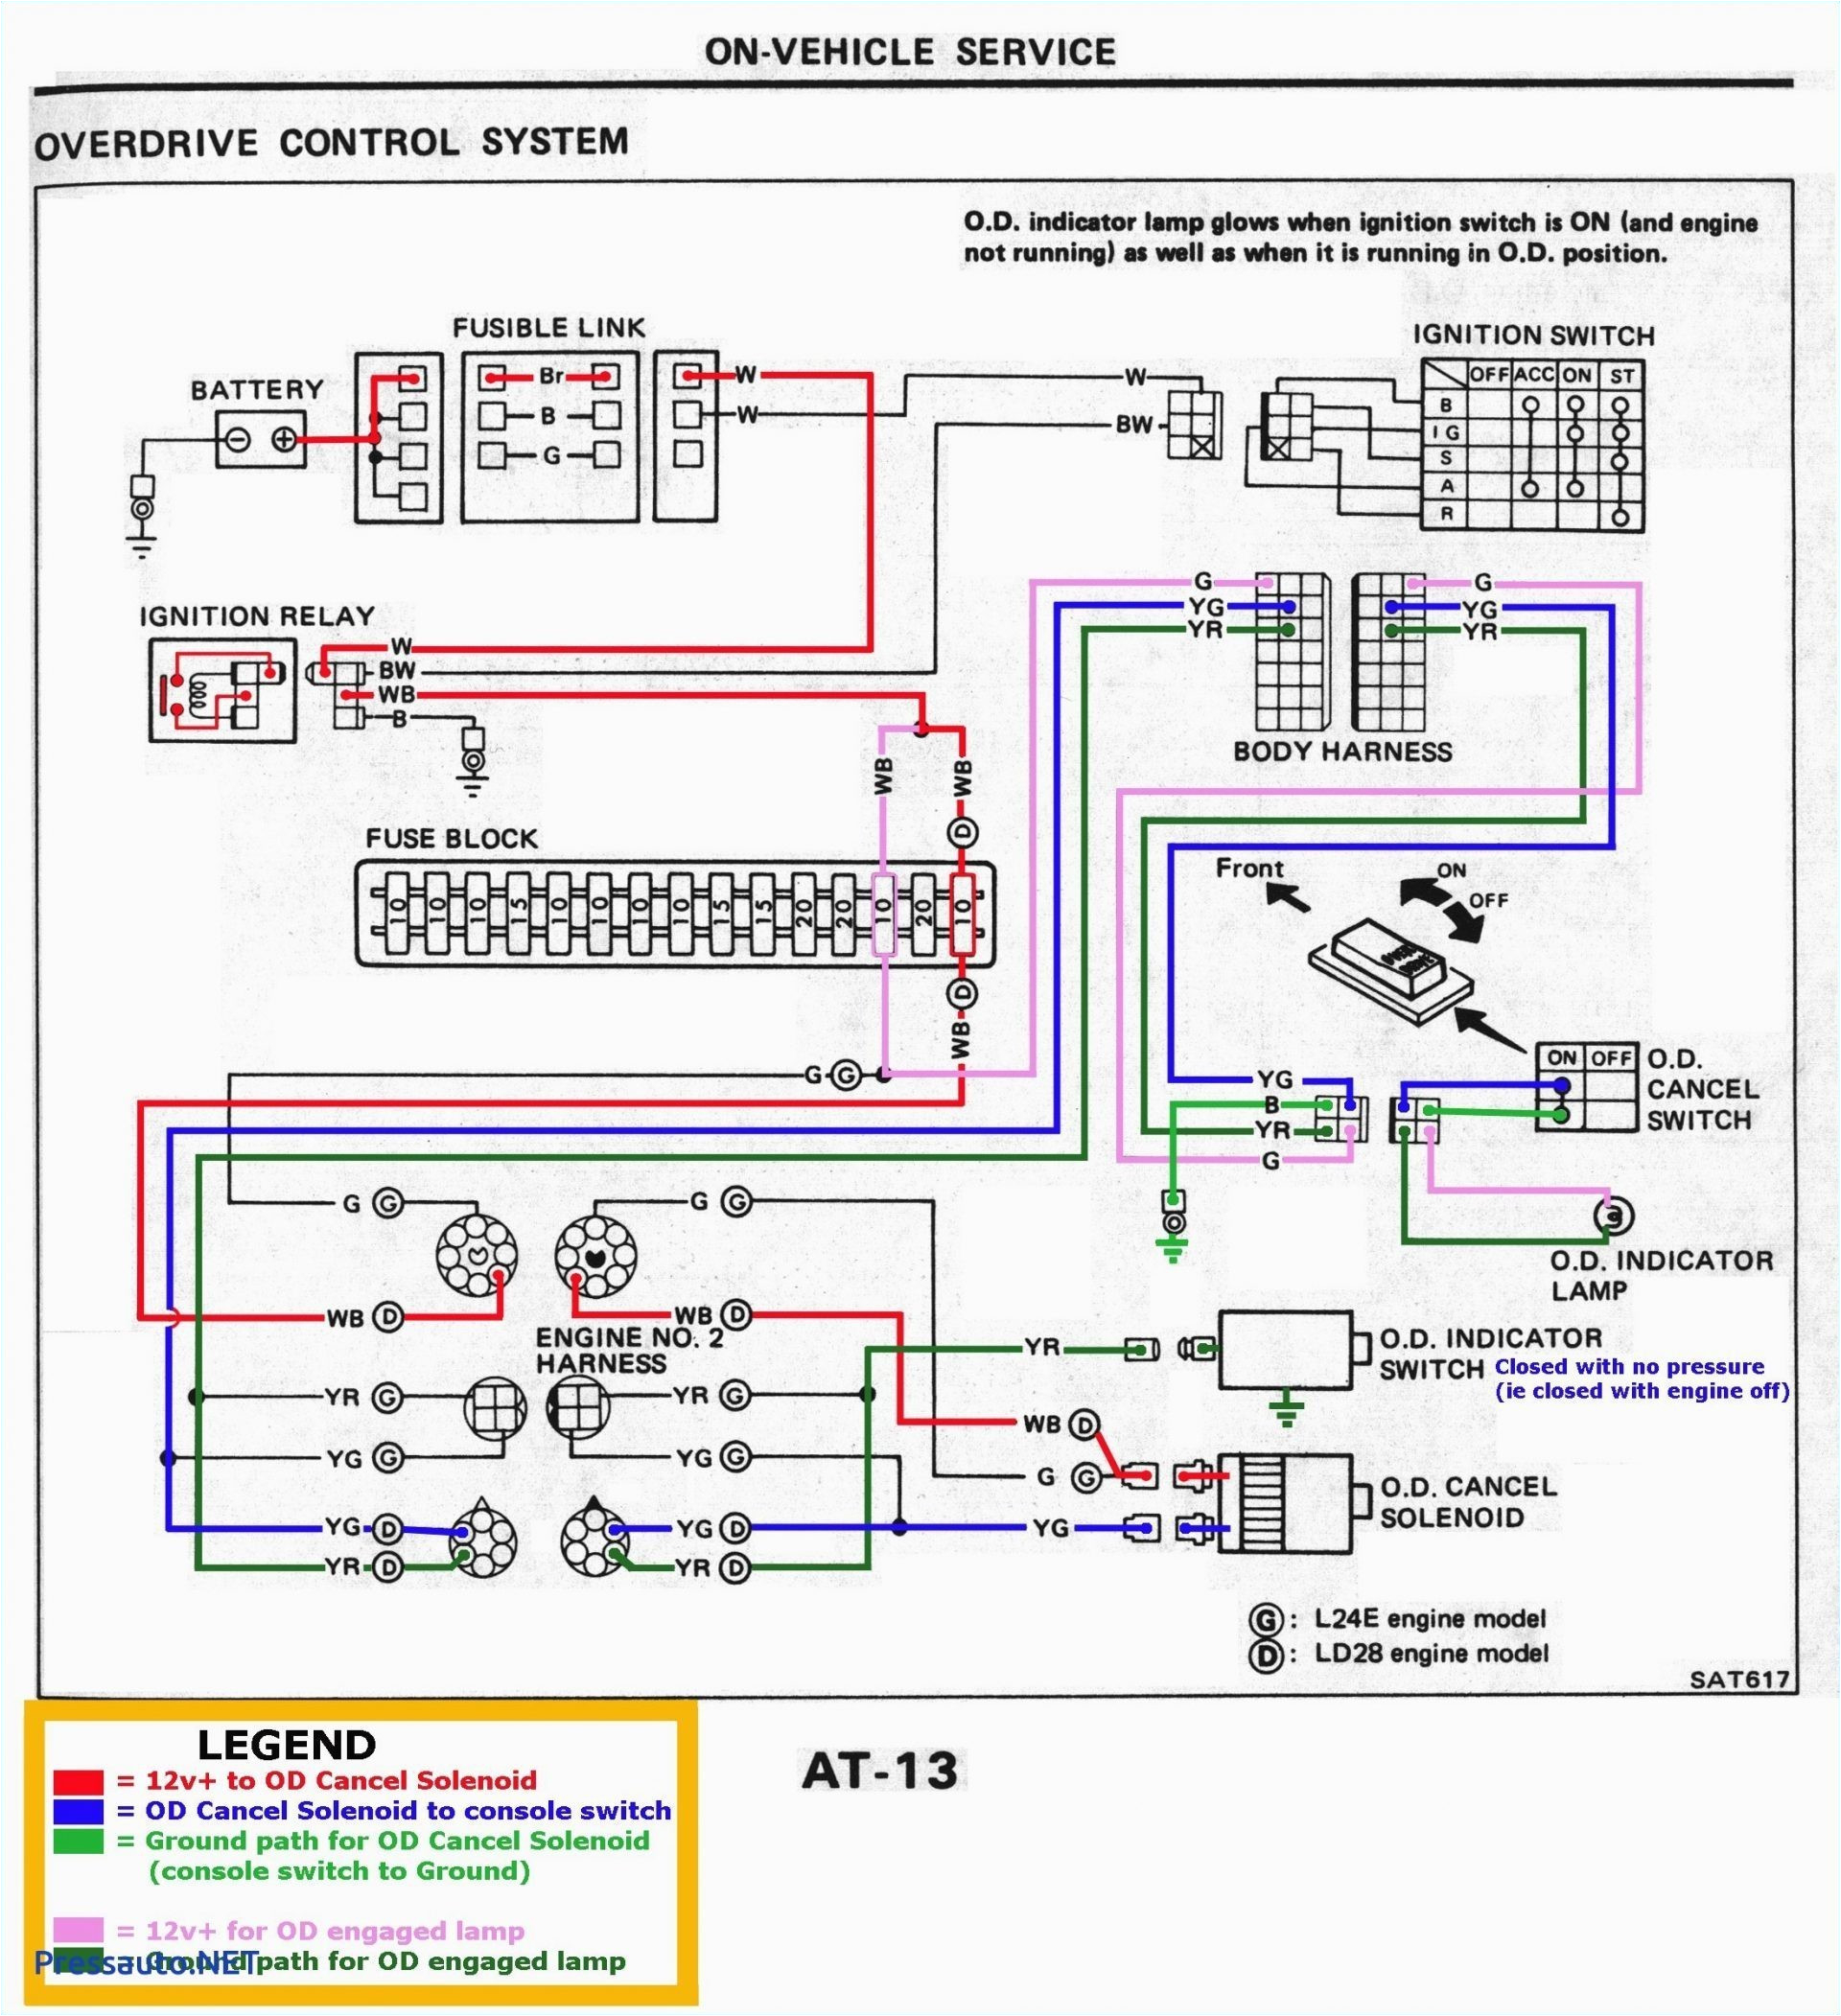 abs wiring harness diagram wiring diagrams dimensions 97 dakota wiring diagram abs wiring diagram abs wiring